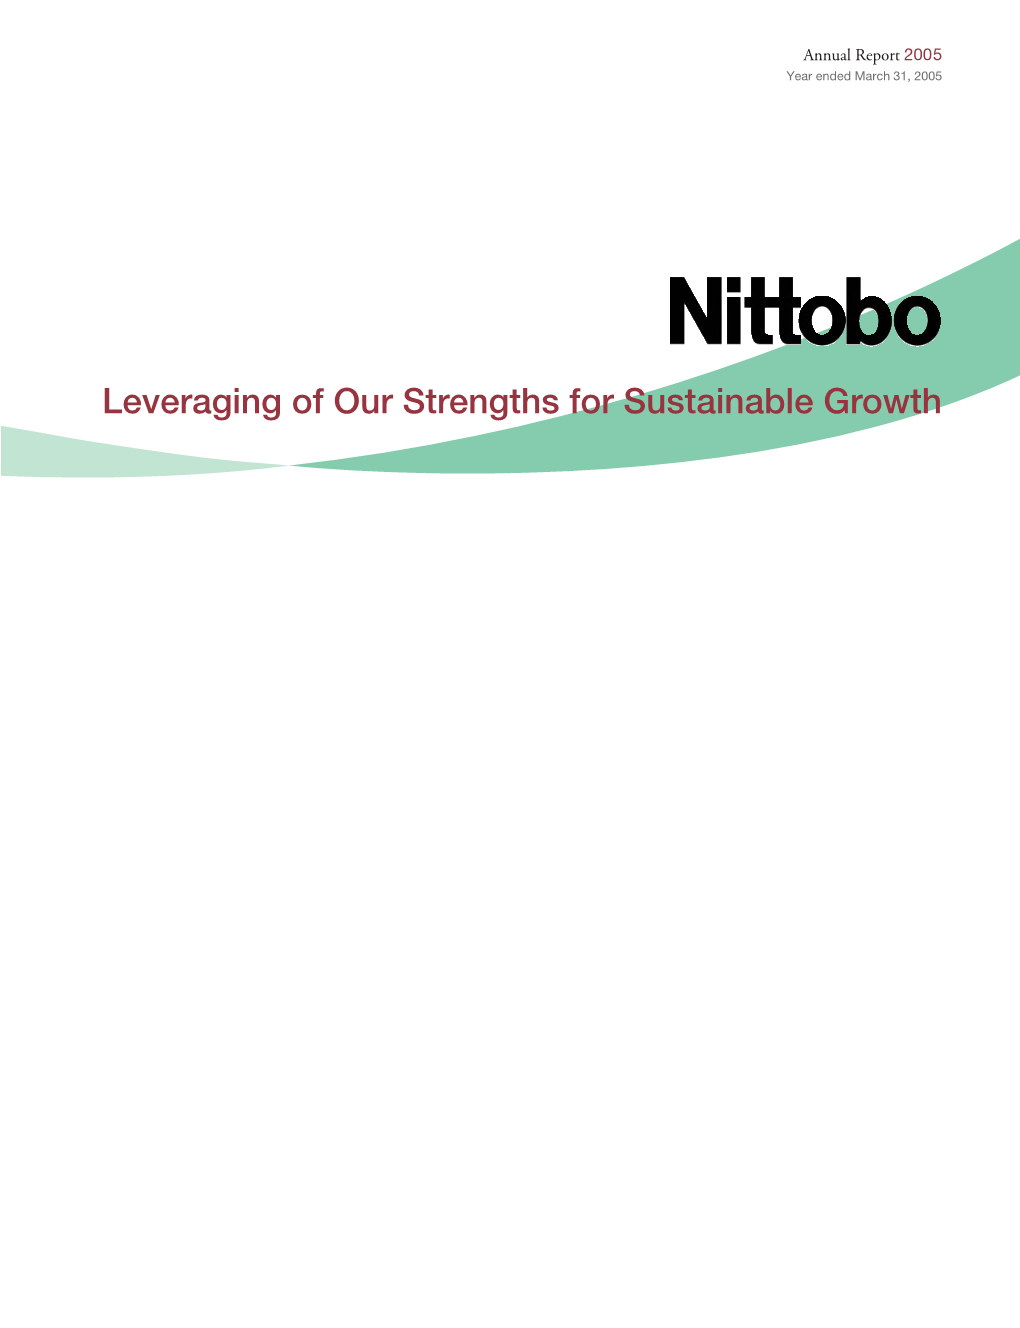 Leveraging of Our Strengths for Sustainable Growth Since Its Establishment As a Textiles Manufacturer in CONTENTS April 1918, Nitto Boseki Co., Ltd